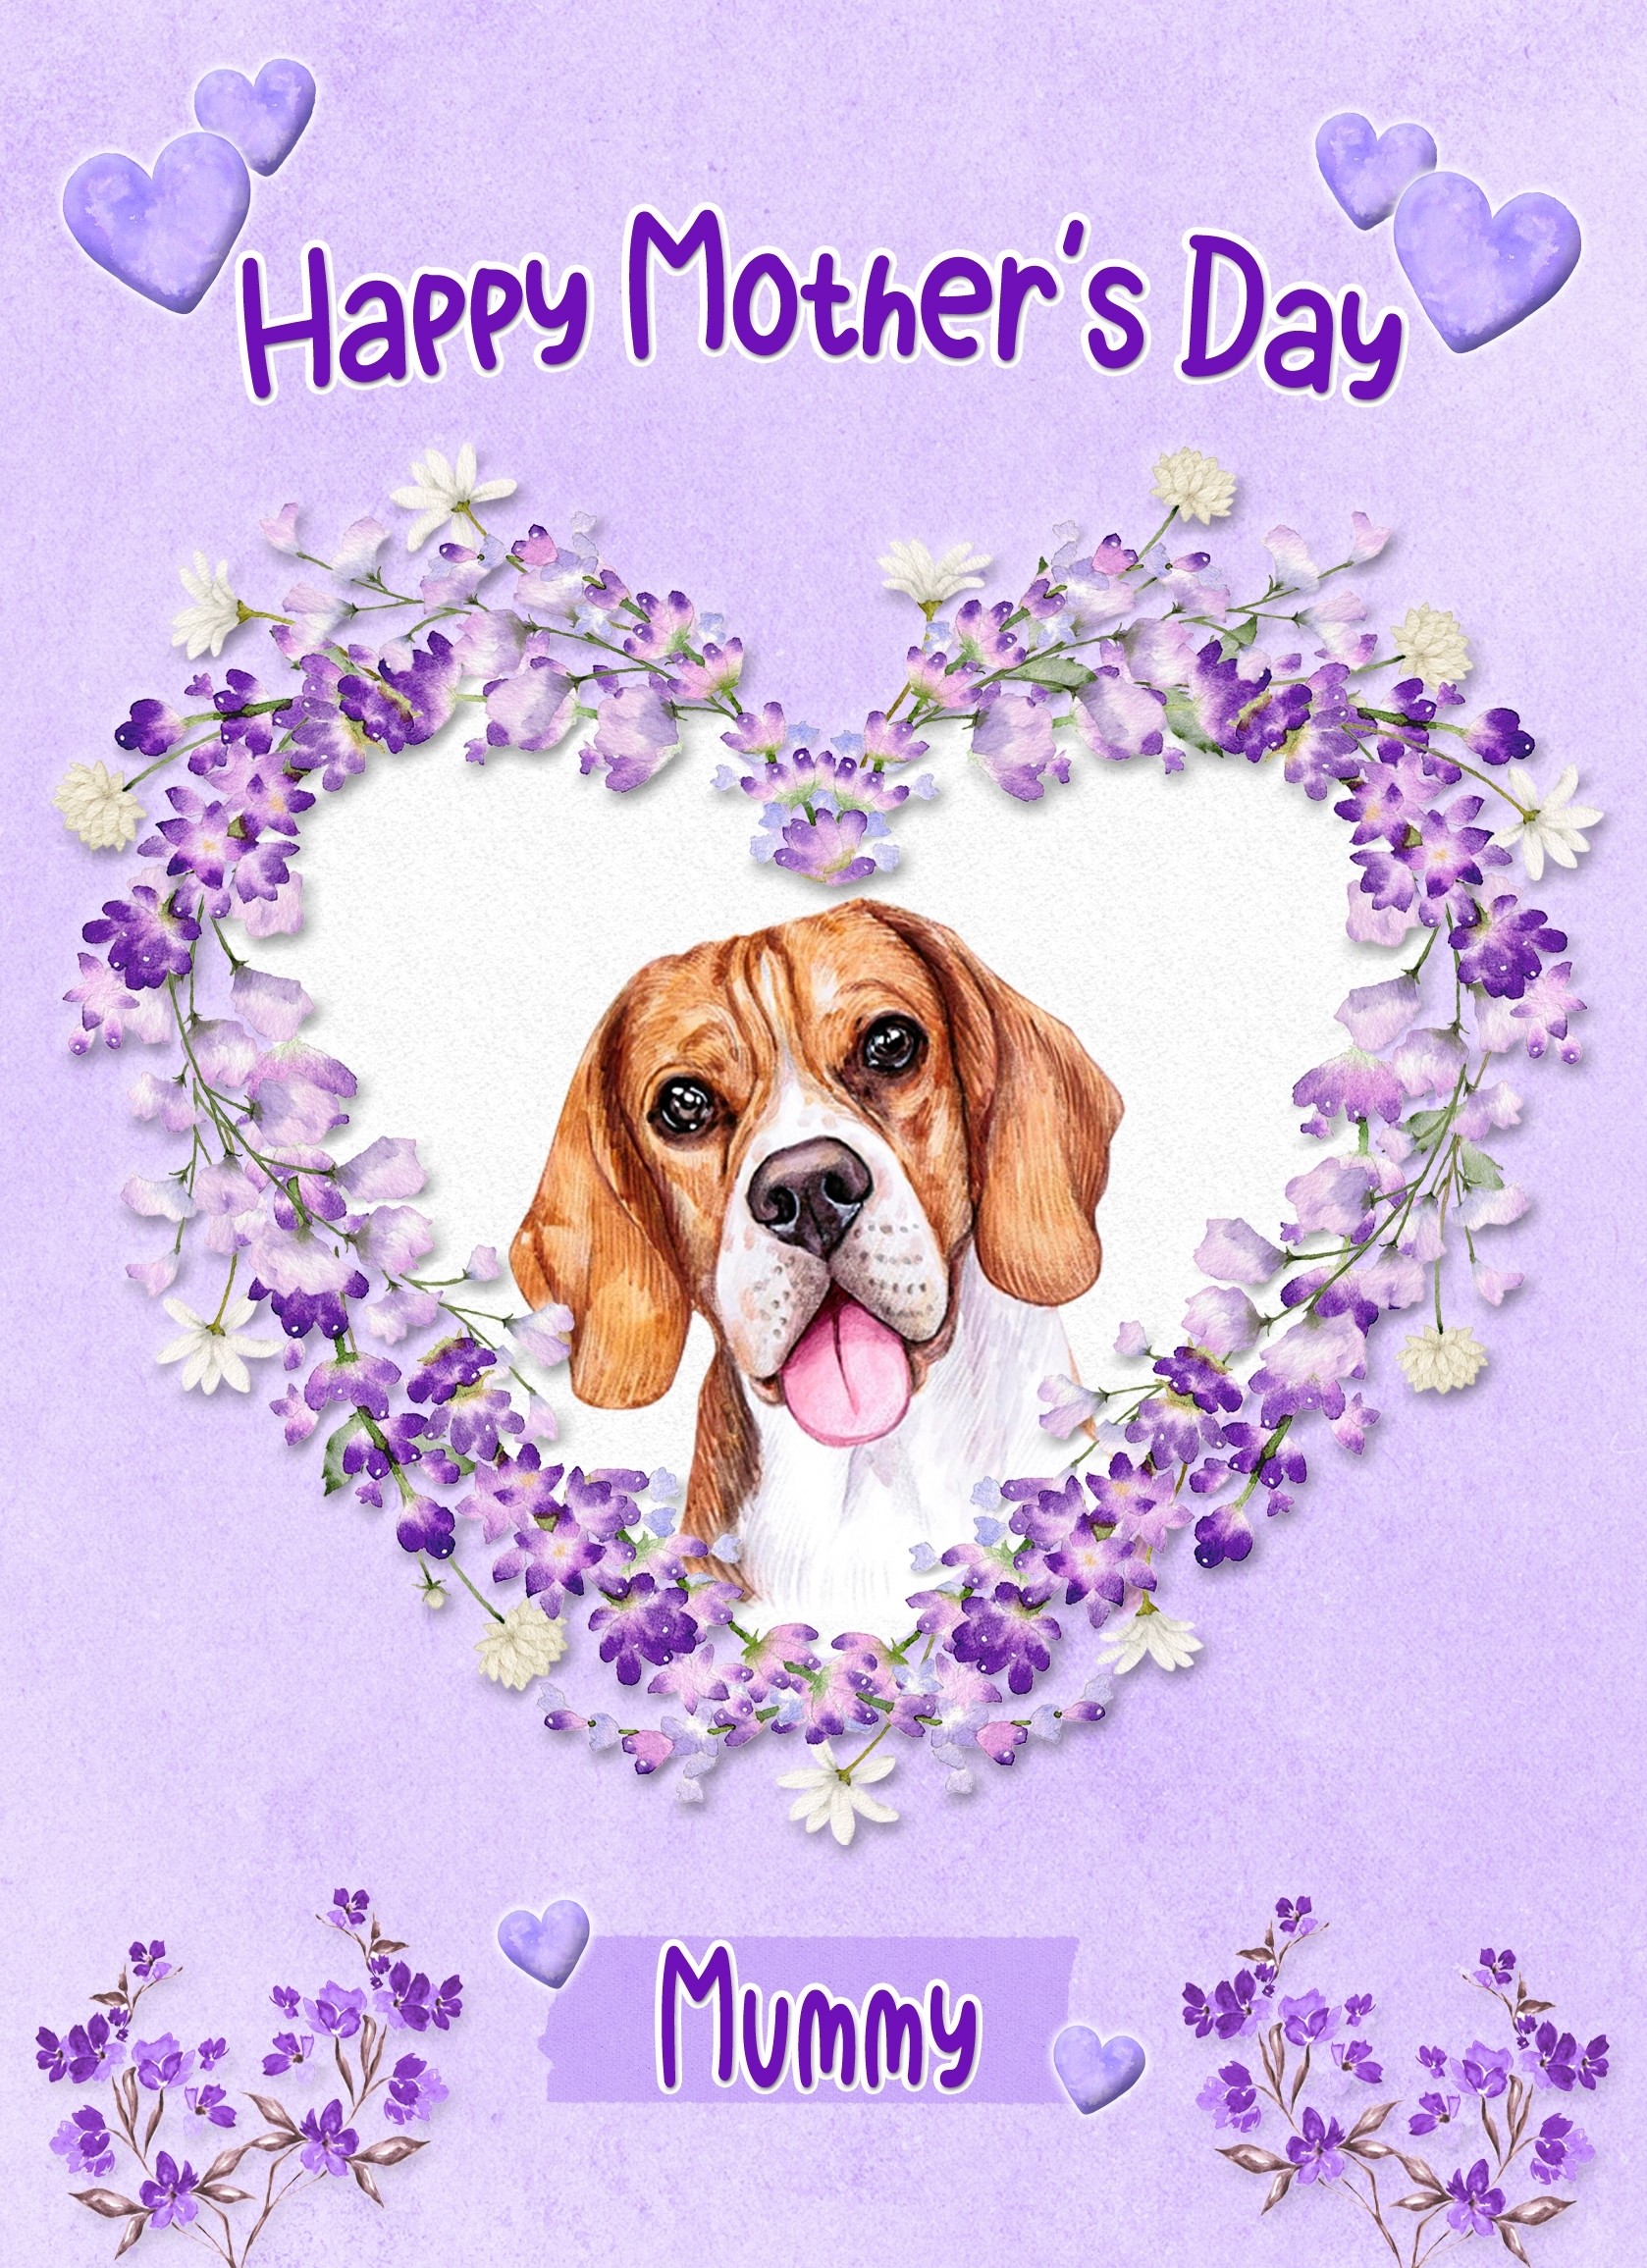 Beagle Dog Mothers Day Card (Happy Mothers, Mummy)